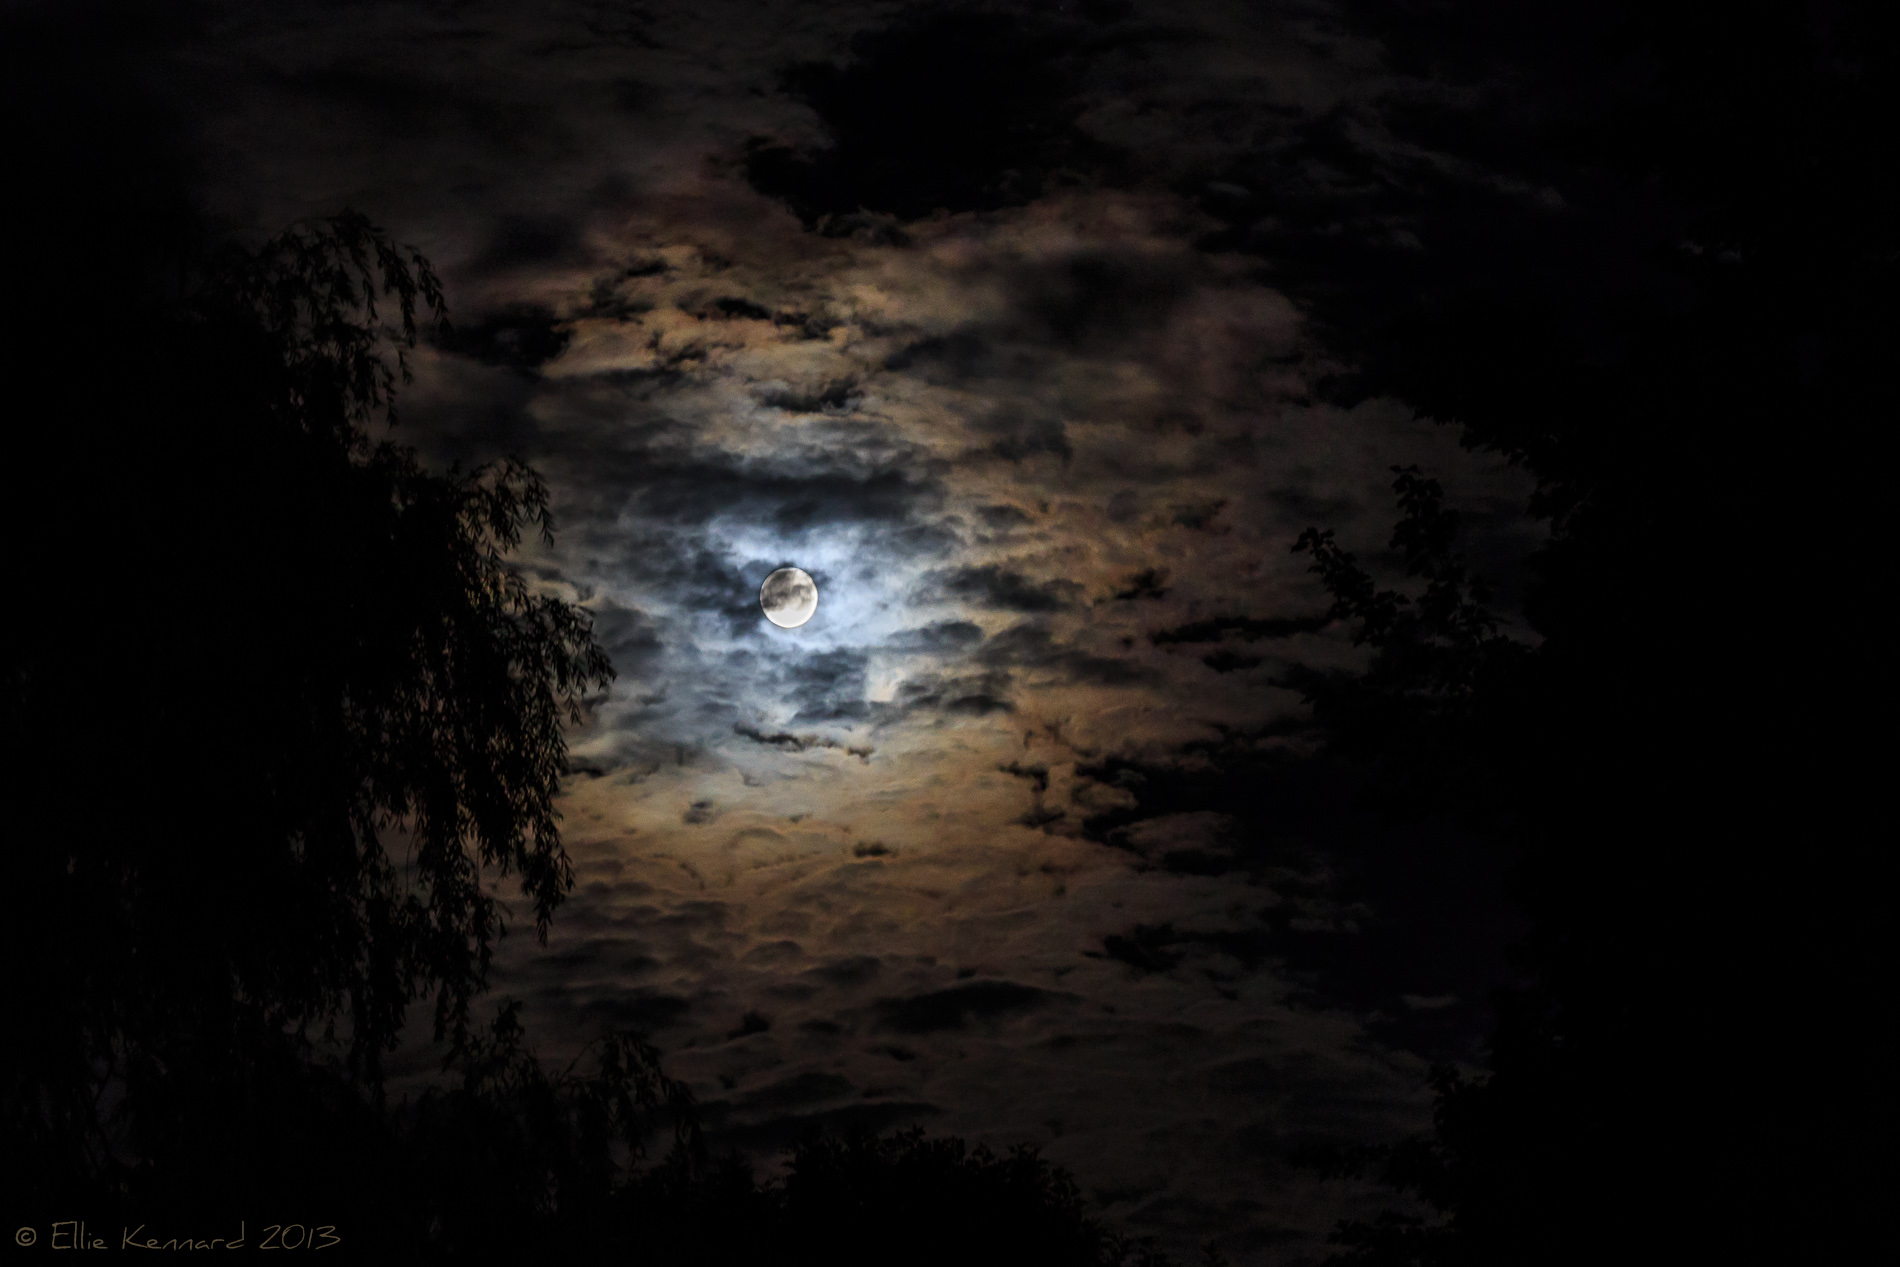 A full moon is surrounded by clouds, some heavy, some lighter, so that the moon illuminates the lighter ones around it. In the foreground on the left are some tree branches hanging down, silhouetted.